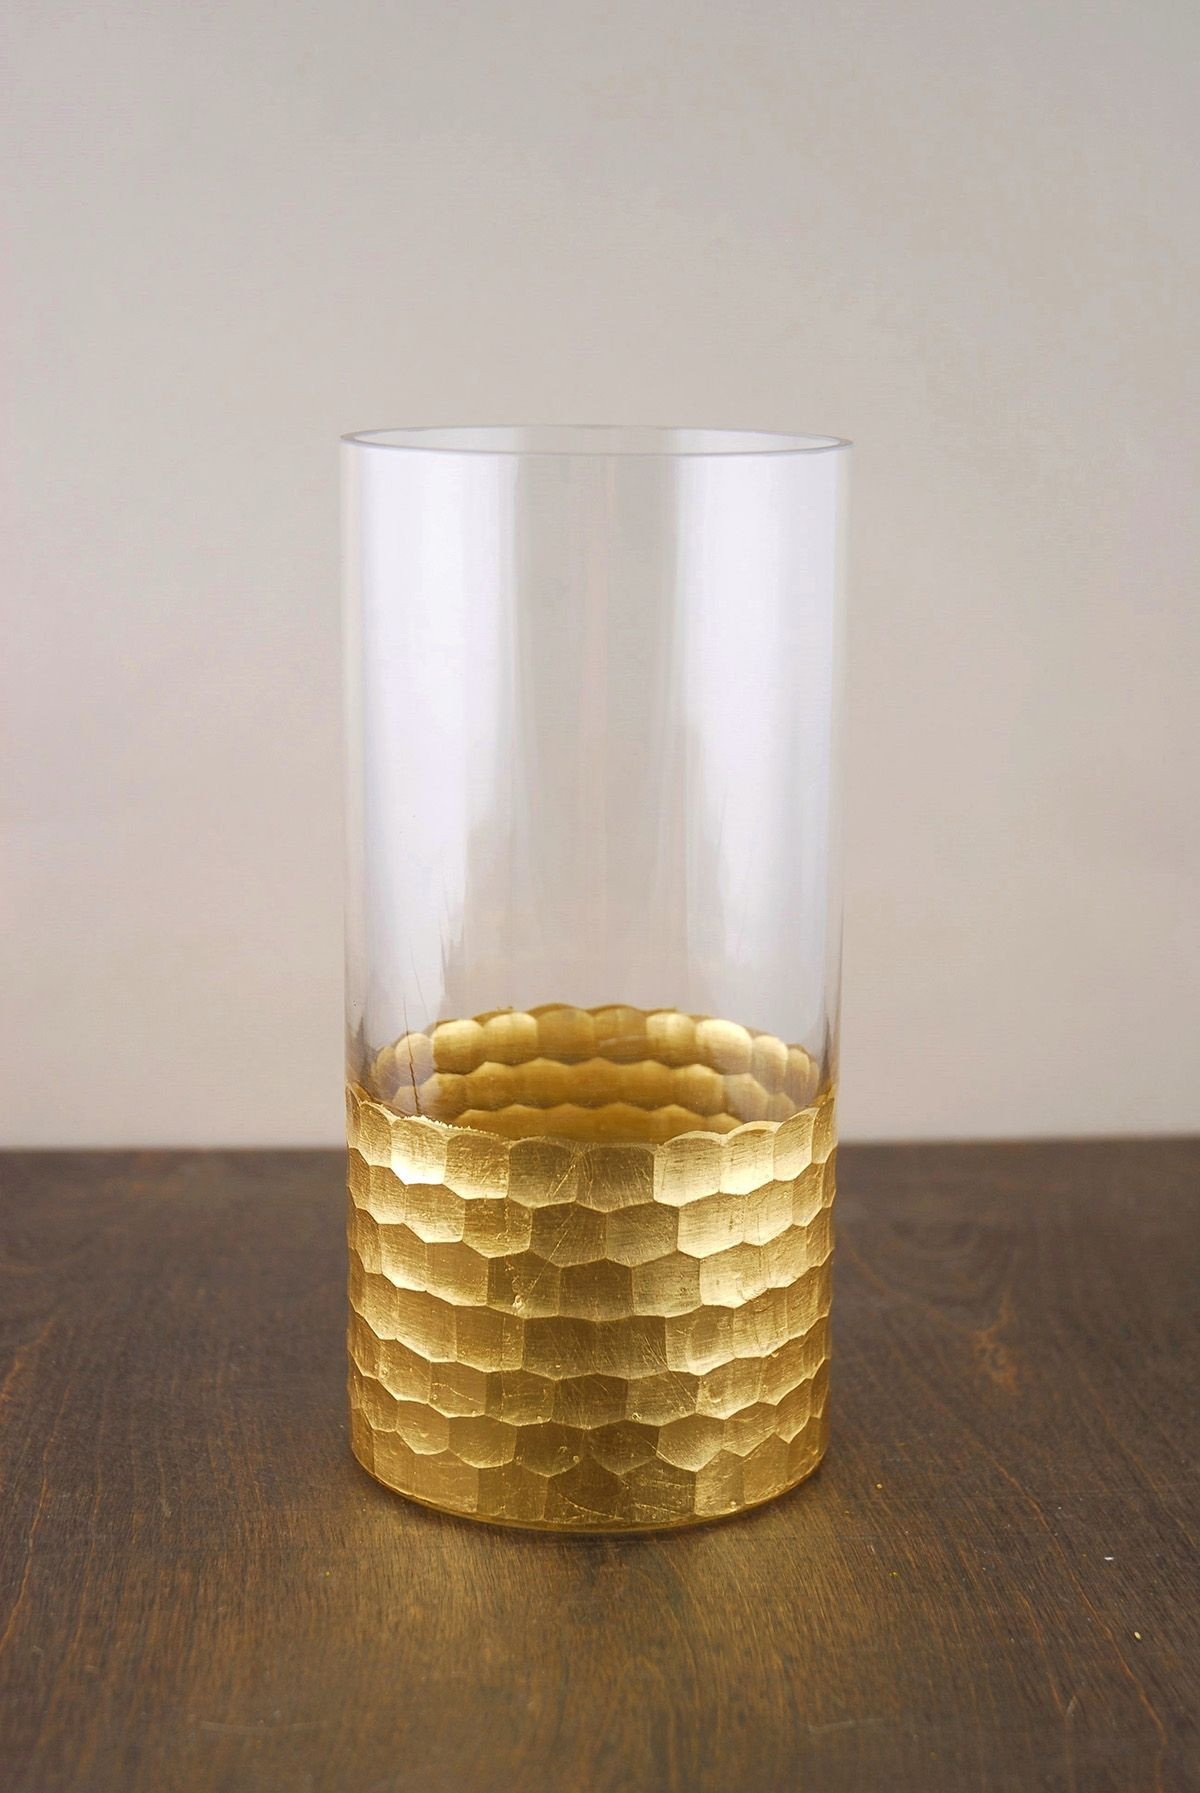 24 attractive Glass Cylinder Vases 20 2024 free download glass cylinder vases 20 of gold cylinder vases images gold honey b cylinder vase 8 x 4 with regard to gold cylinder vases images gold honey b cylinder vase 8 x 4